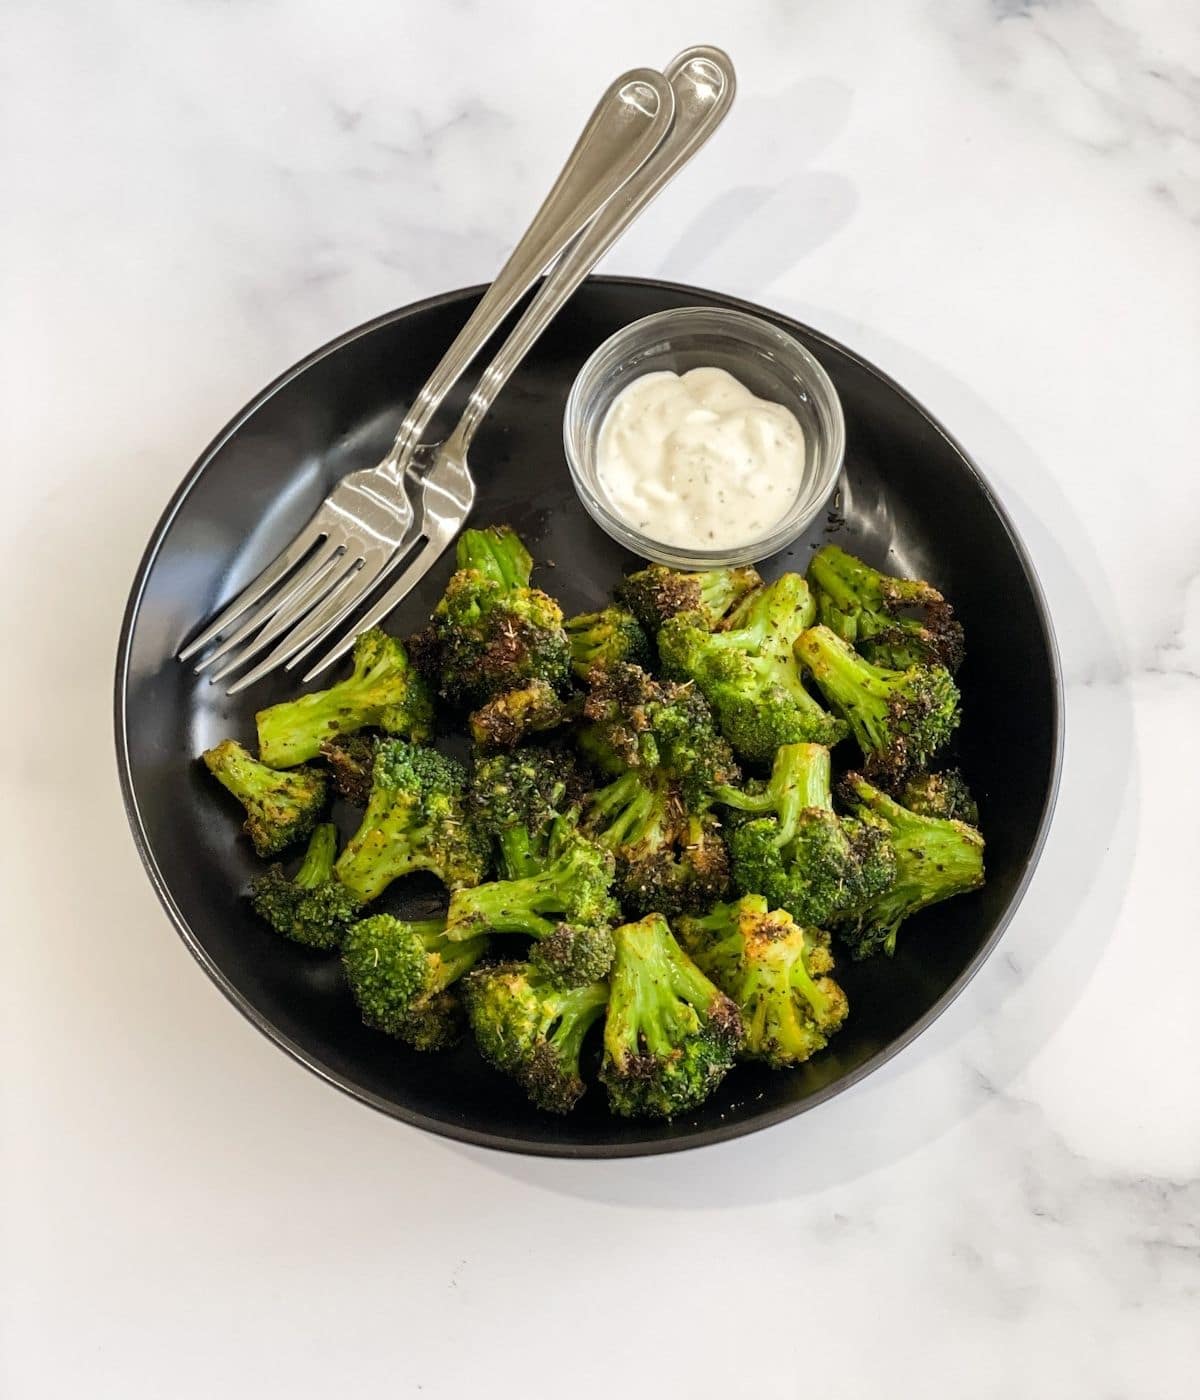 A plate of air fried broccoli is on the table with vegan ranch dressing and fork.